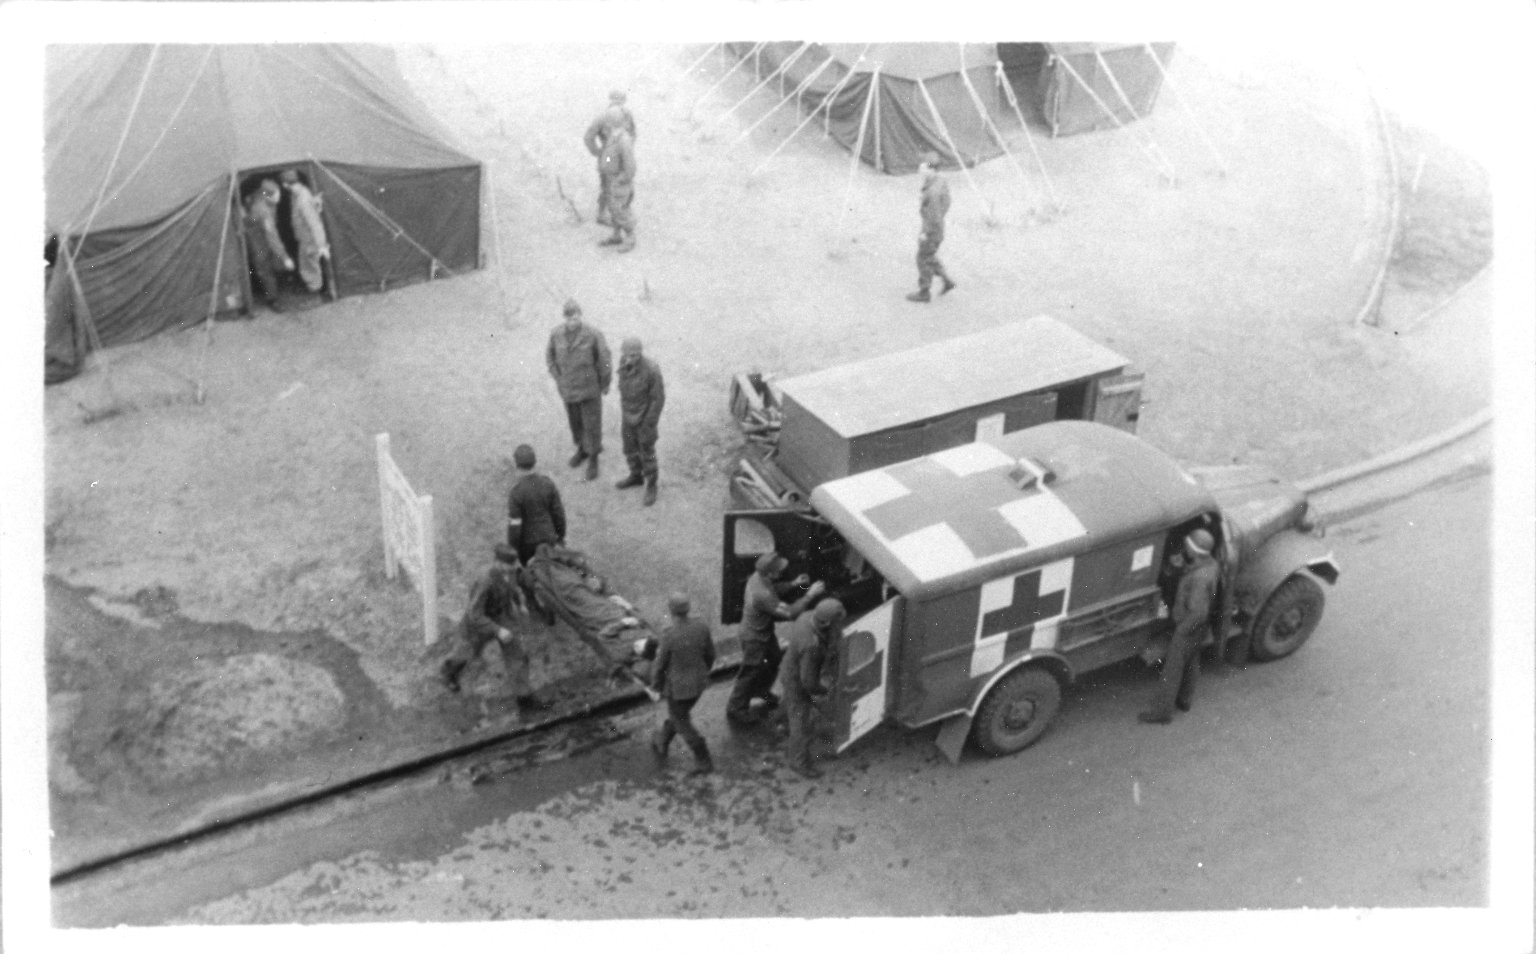 Patient transport from the ambulance into the hospital in Tongres, Belgium.